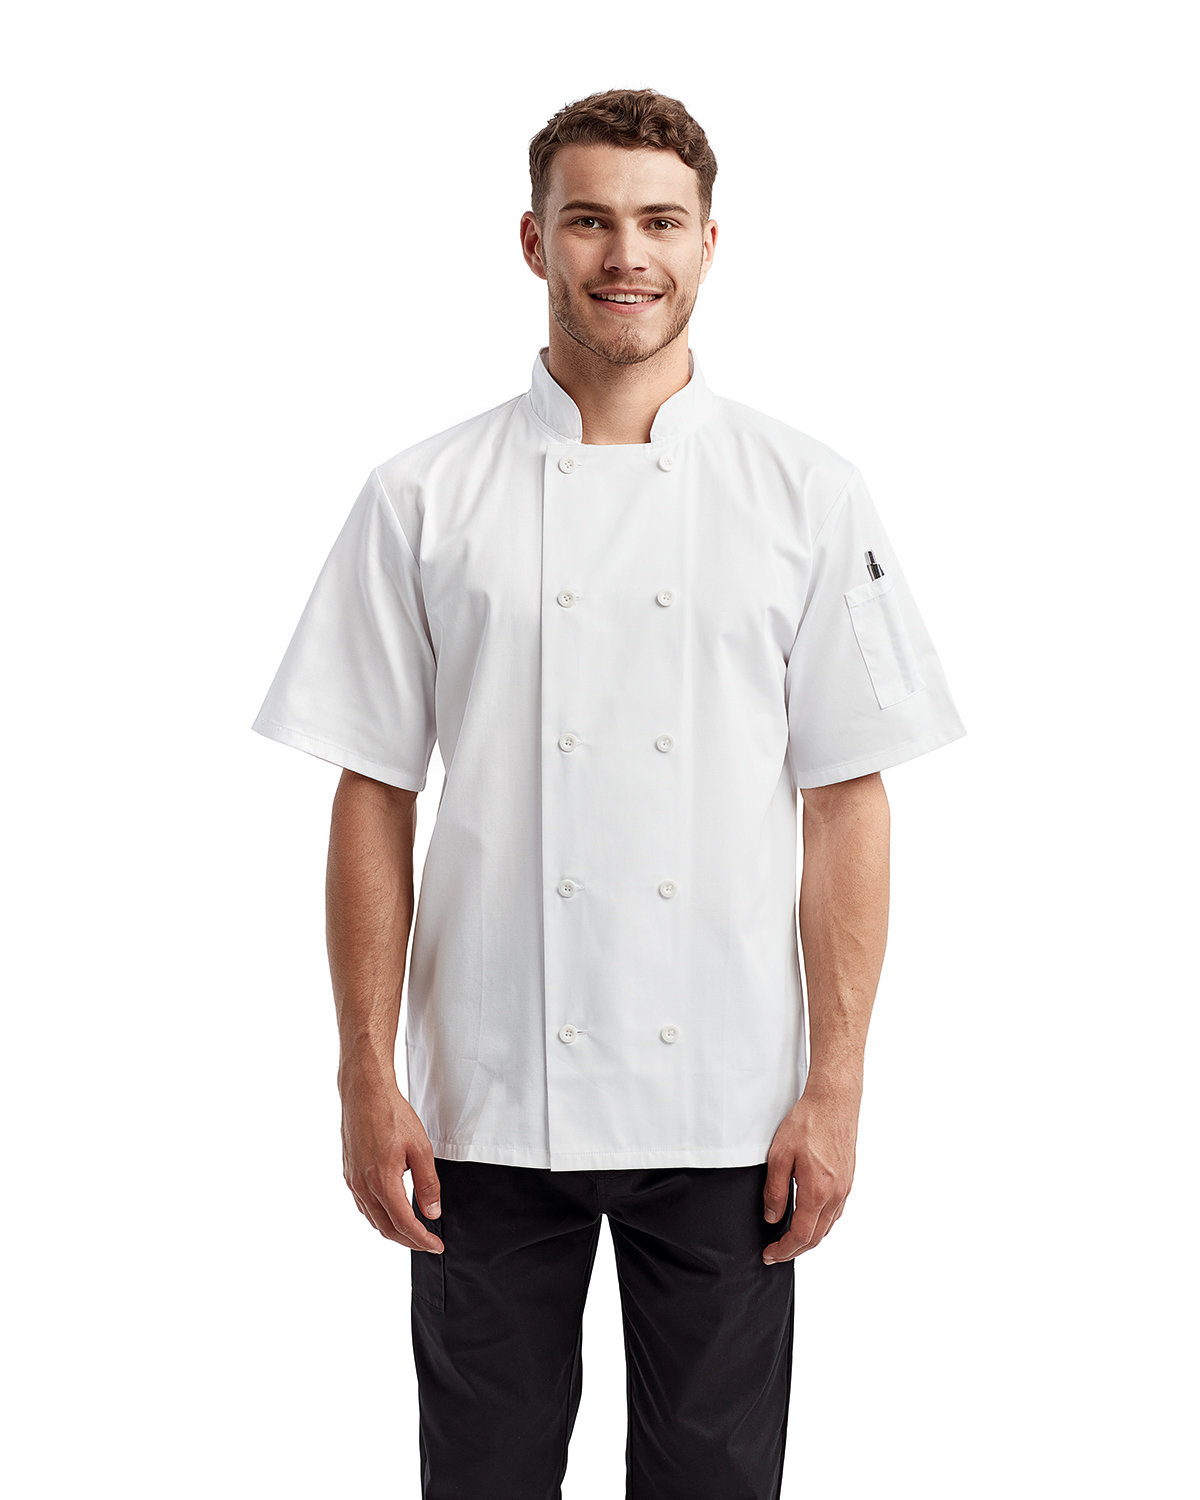 Artisan Collection by Reprime Unisex Short-Sleeve Sustainable Chef's Jacket WHITE 